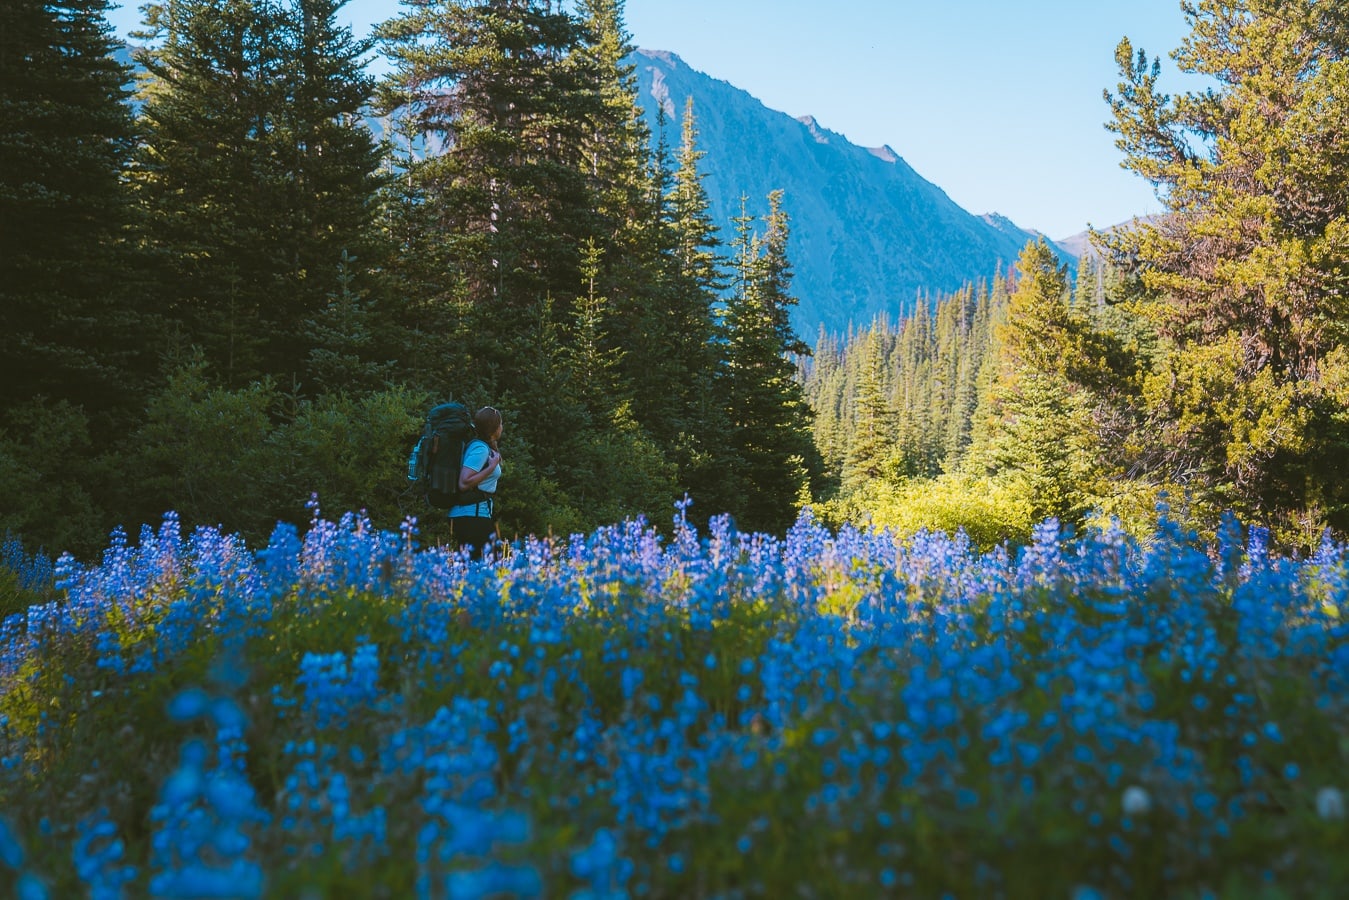 7 Principles Of Leave No Trace: wildflowers need to be left alone